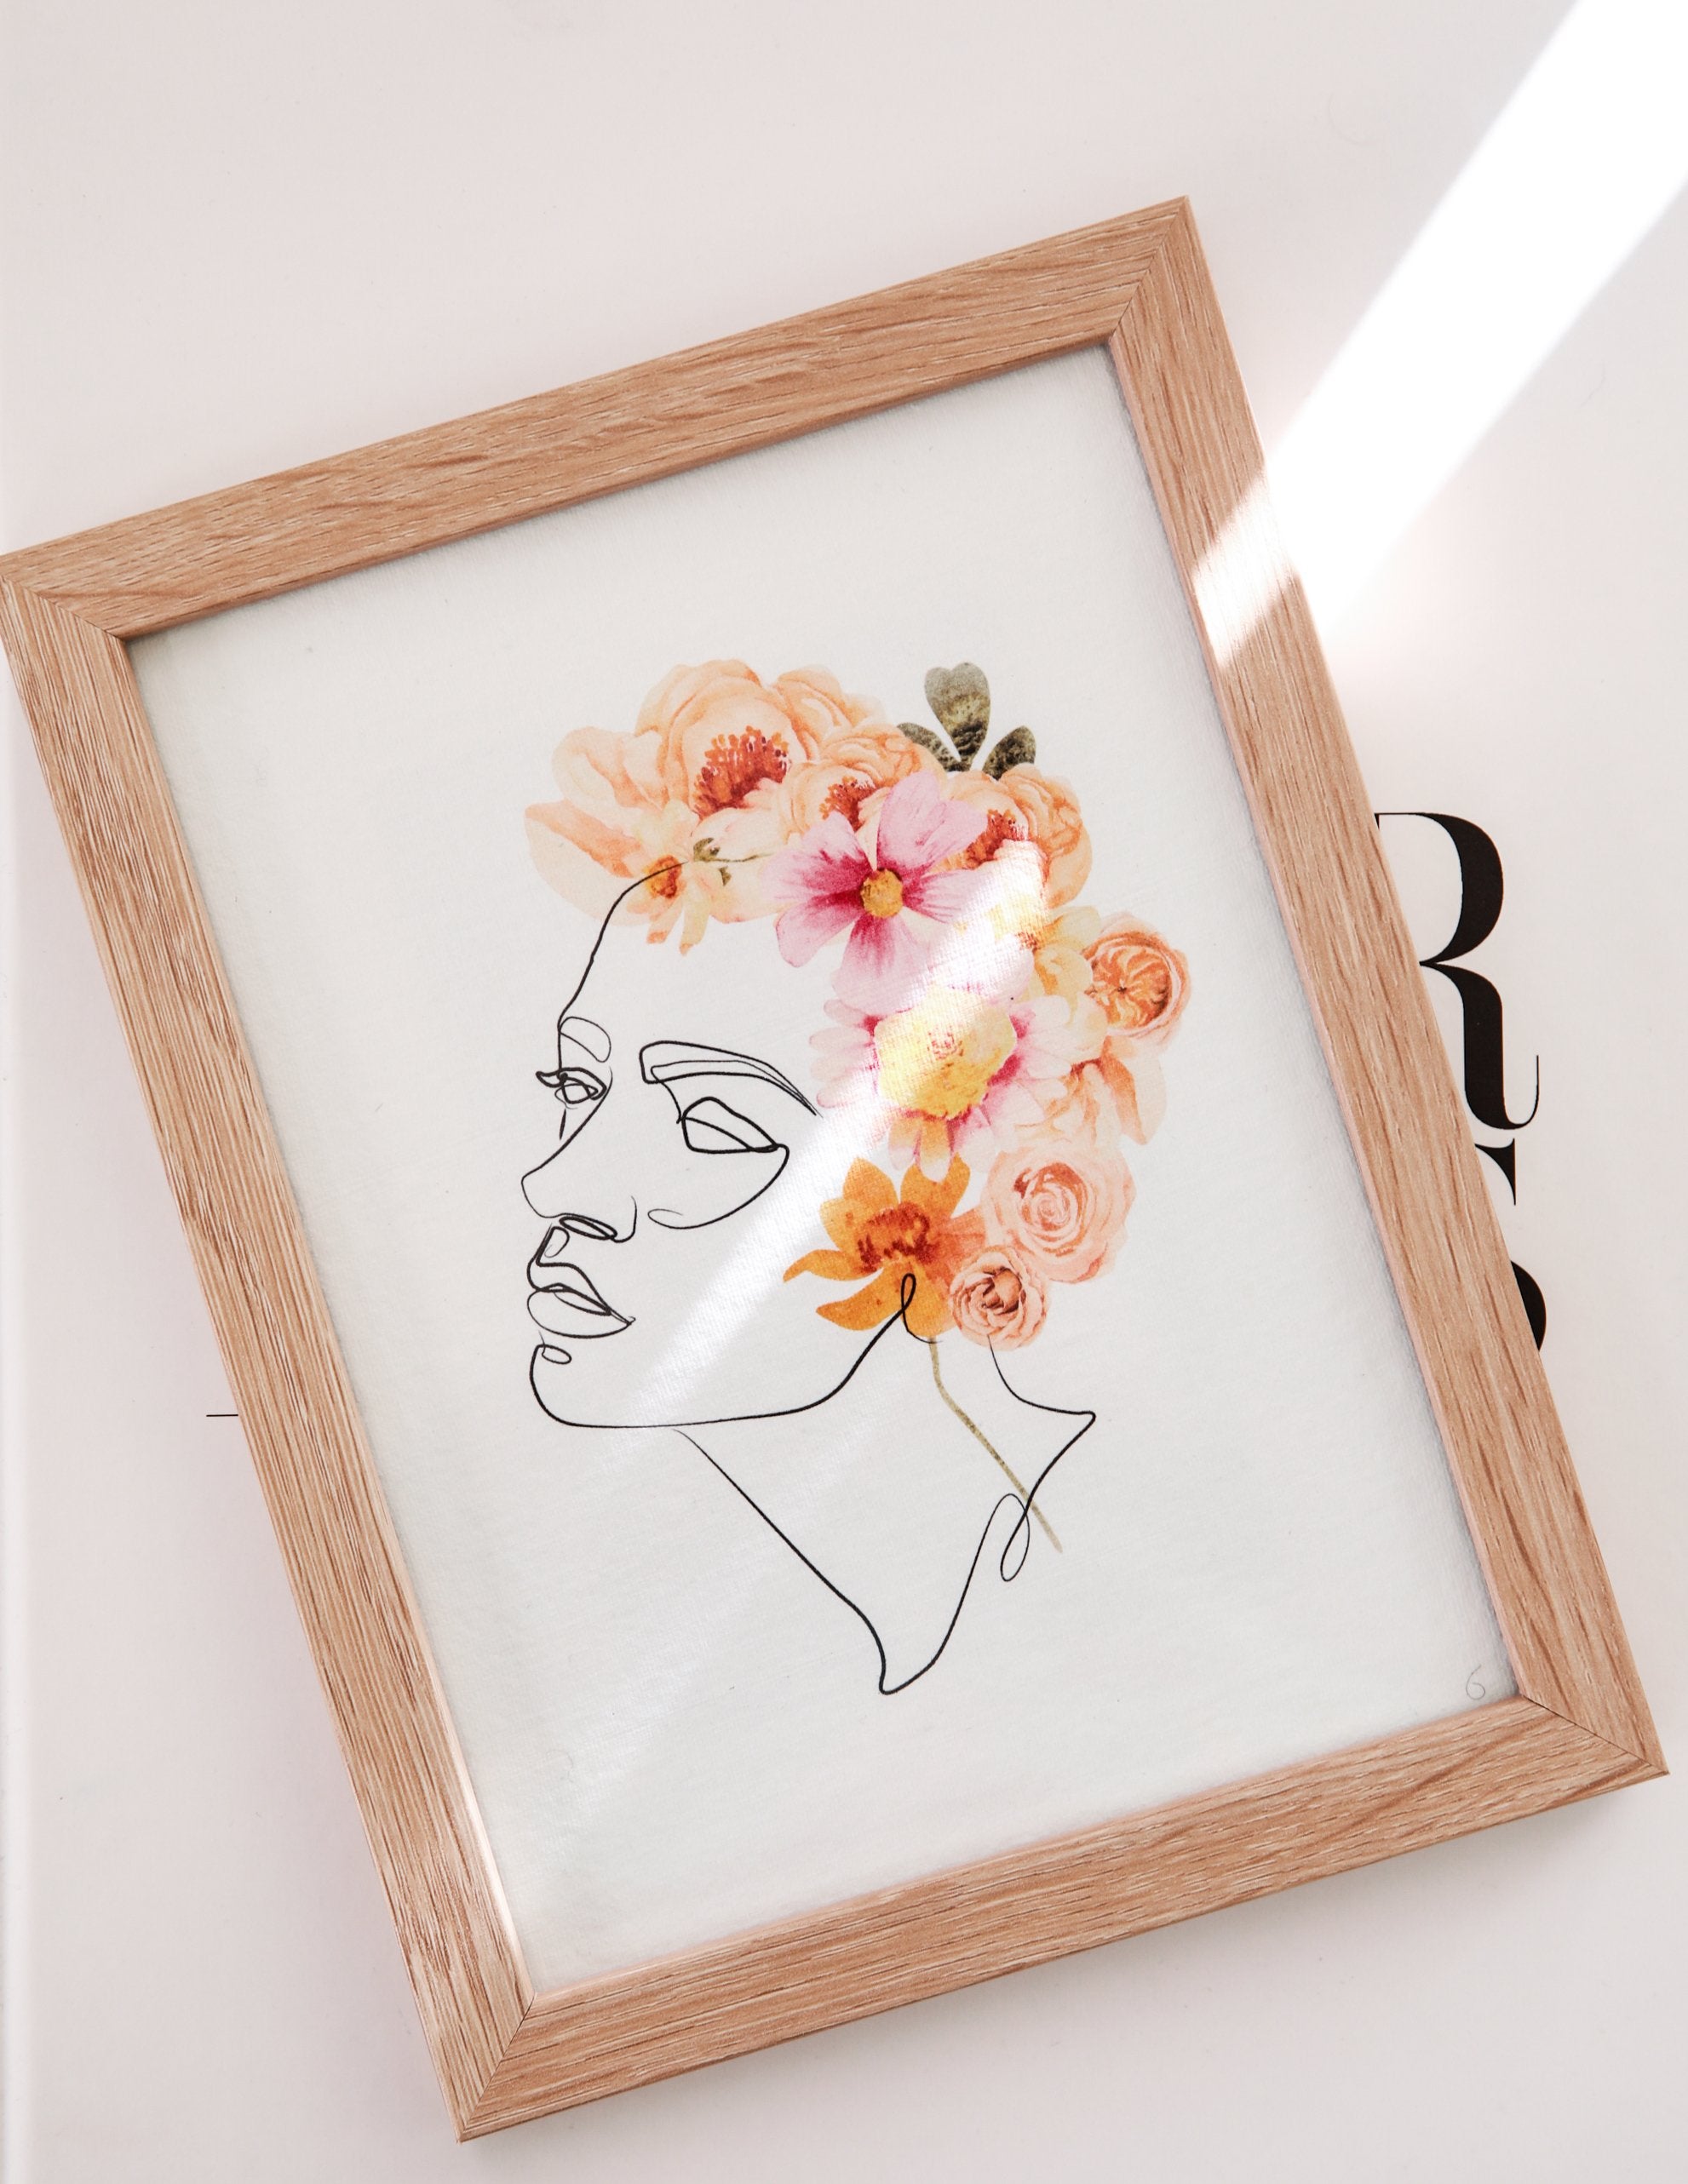 Female Portrait line art and Floral Wreath - Feathers and Stone